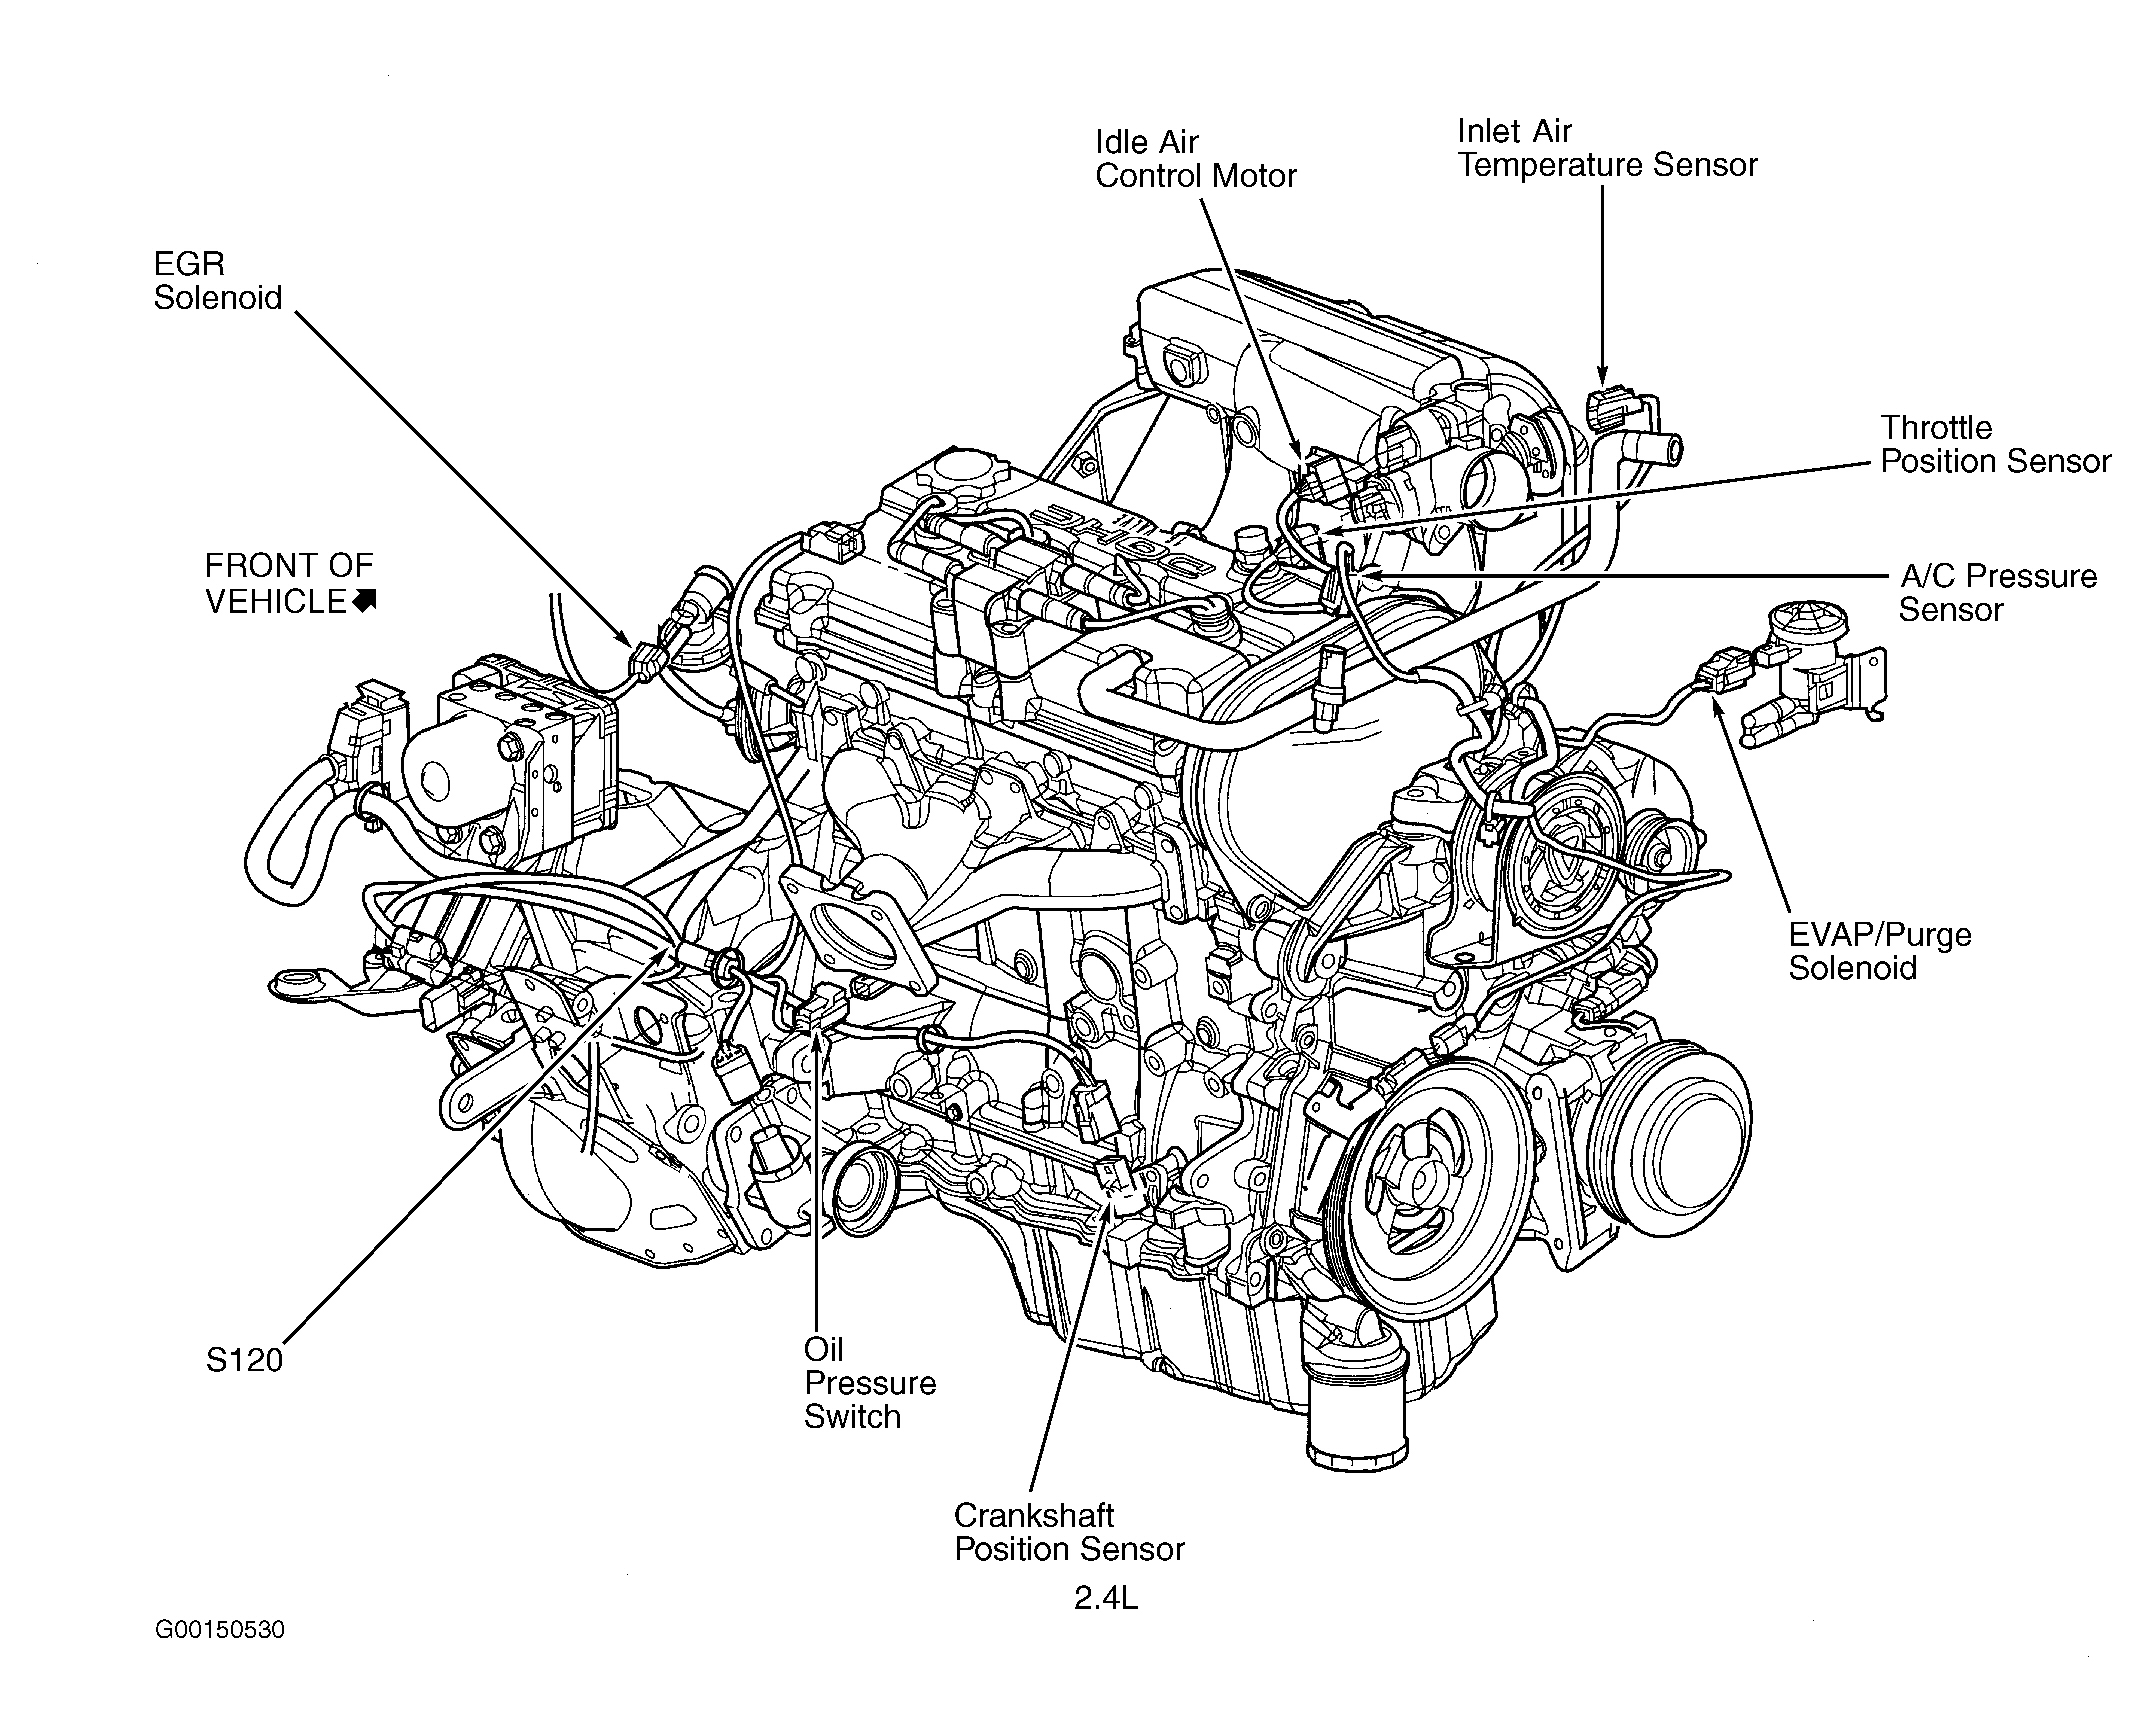 Dodge Grand Caravan EX 2003 - Component Locations -  Right Side Of Engine (2.4L)